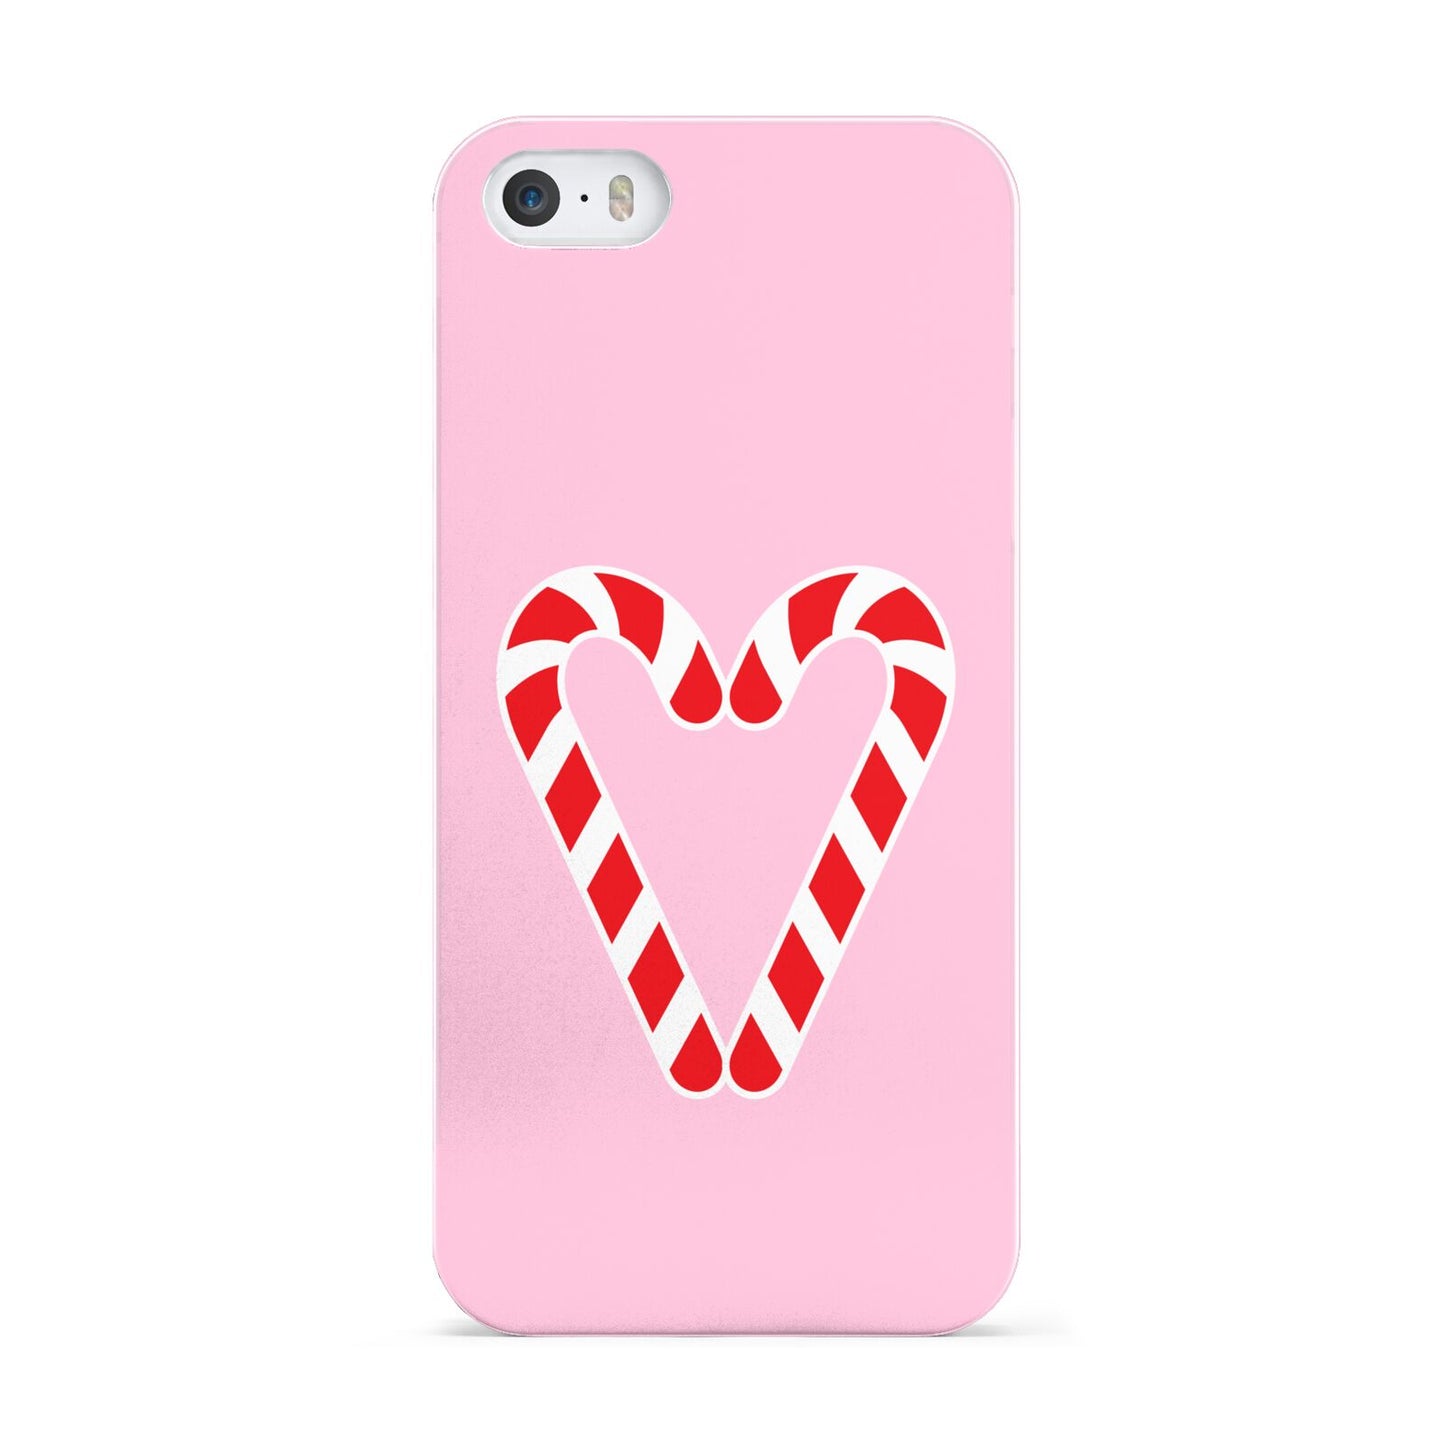 Candy Cane Heart Apple iPhone 5 Case